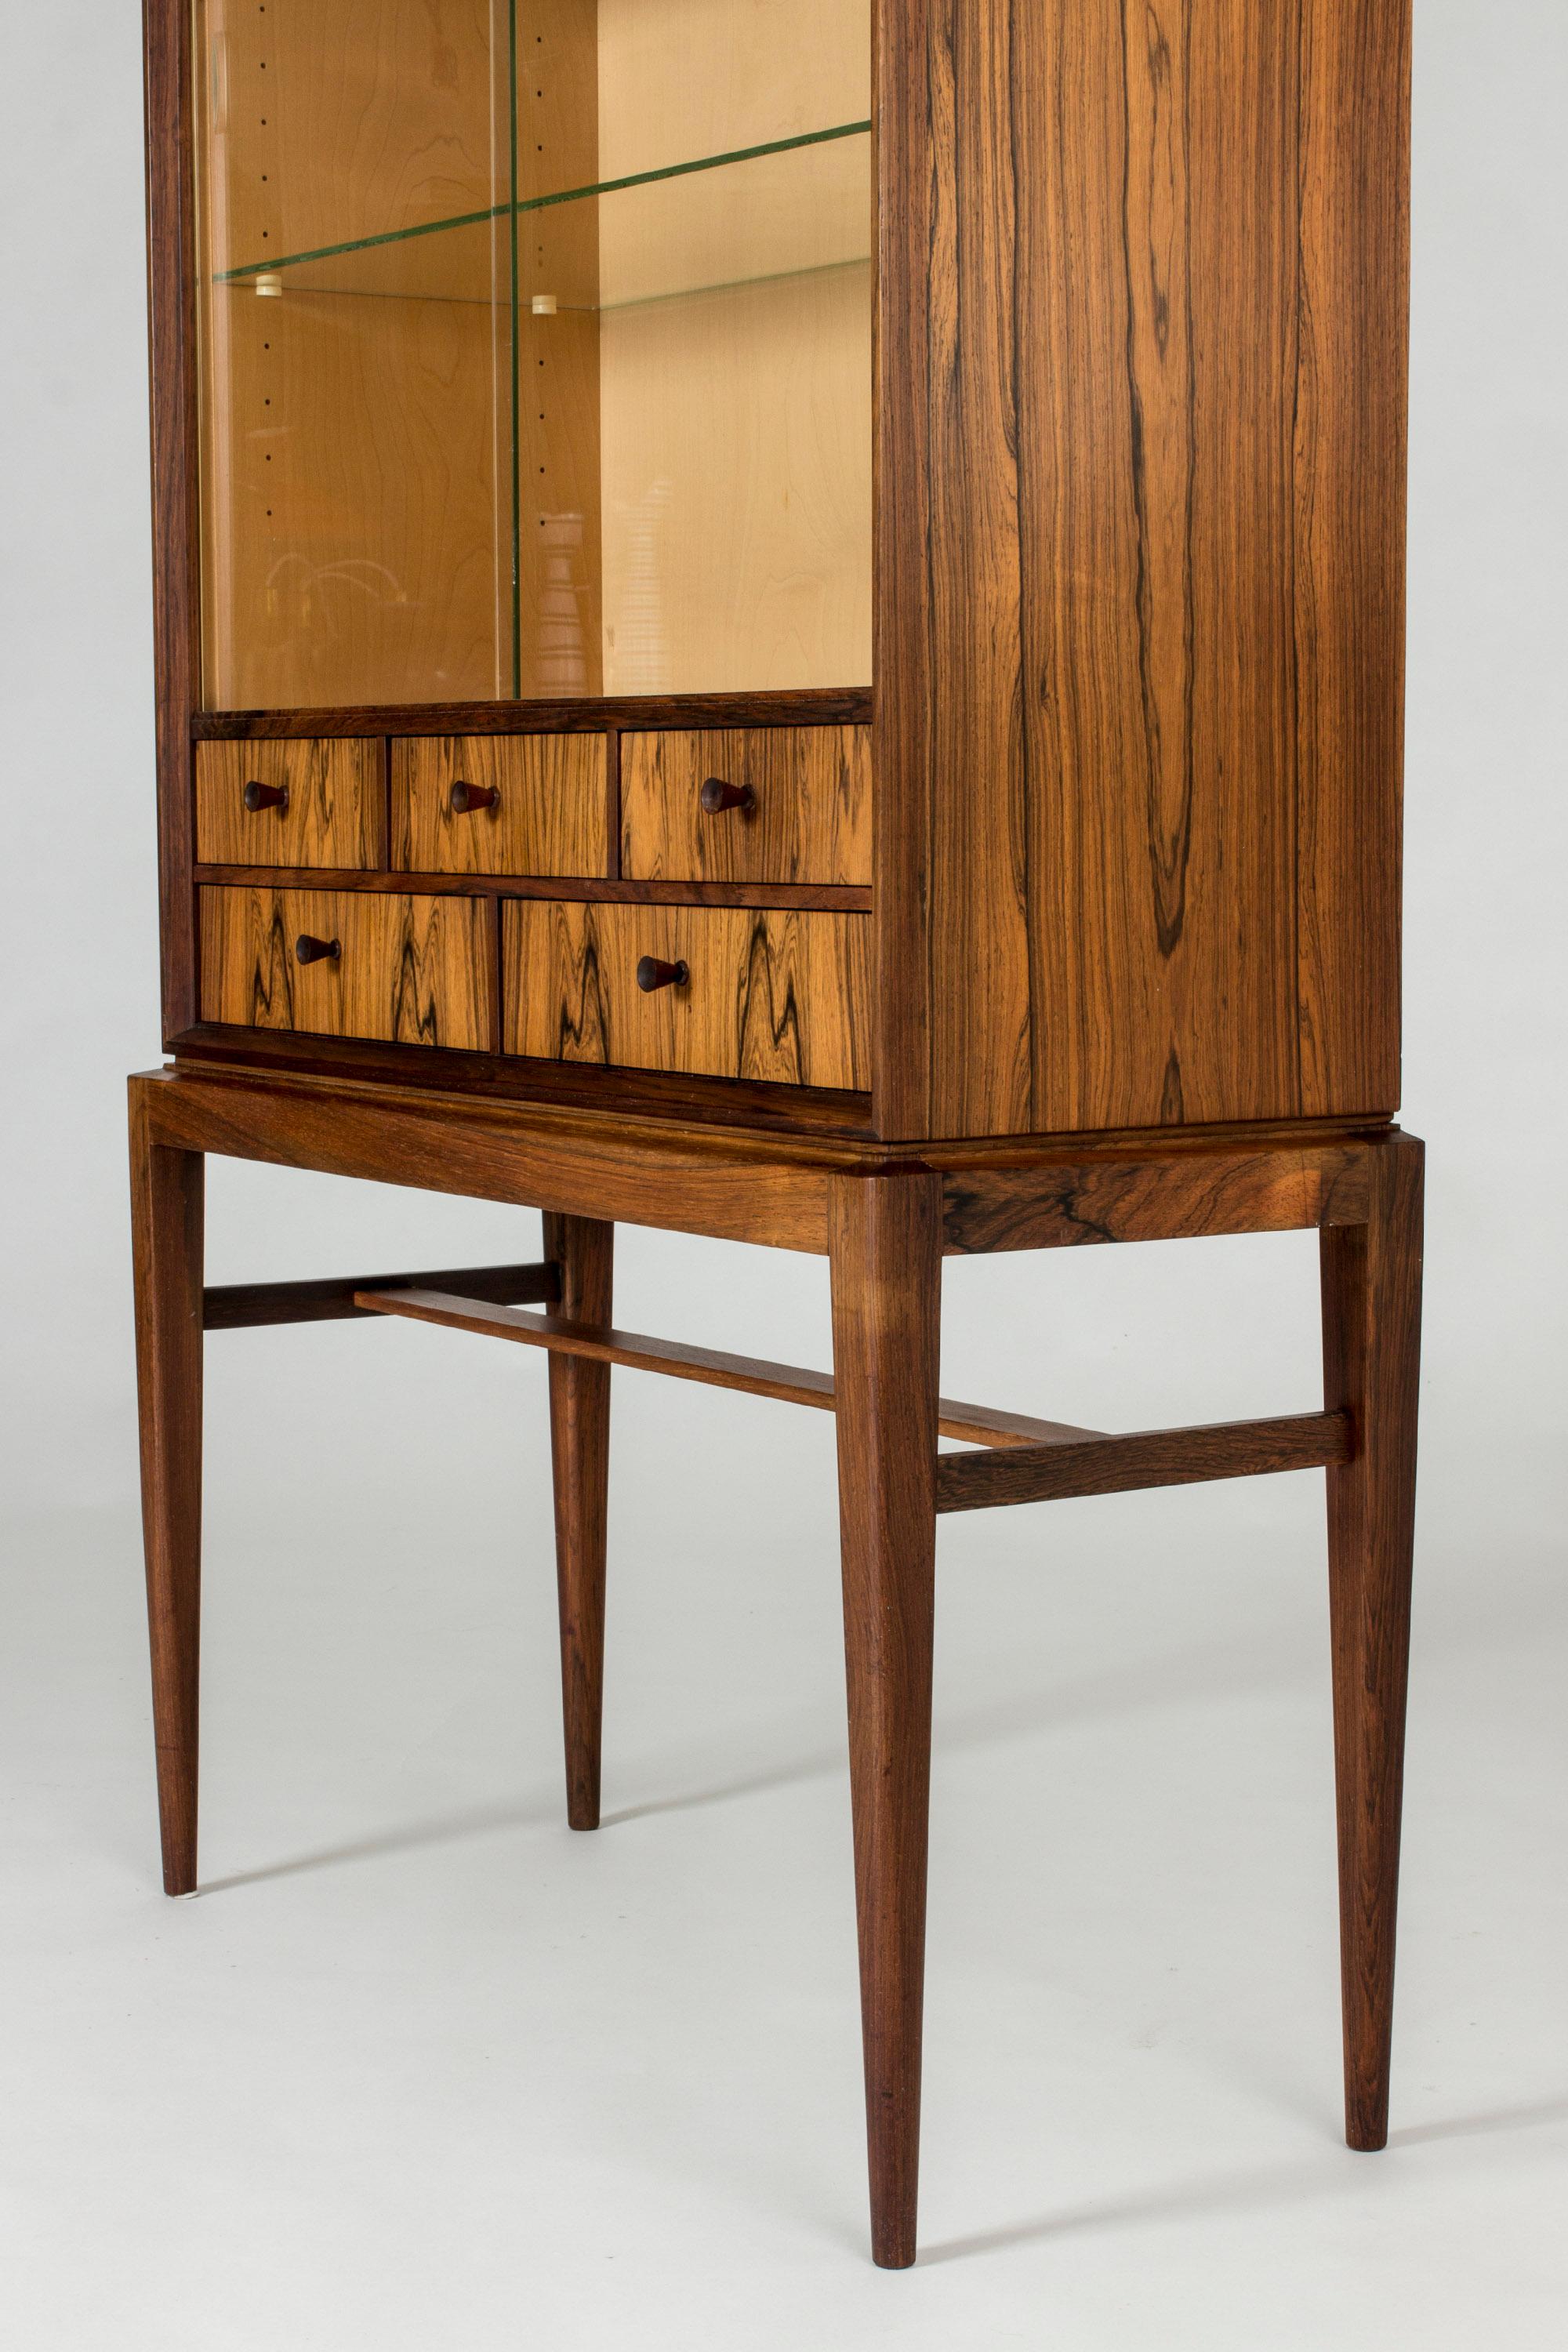 Midcentury Rosewood and Glass Vitrine Cabinet by Svante Skogh for Seffle 1